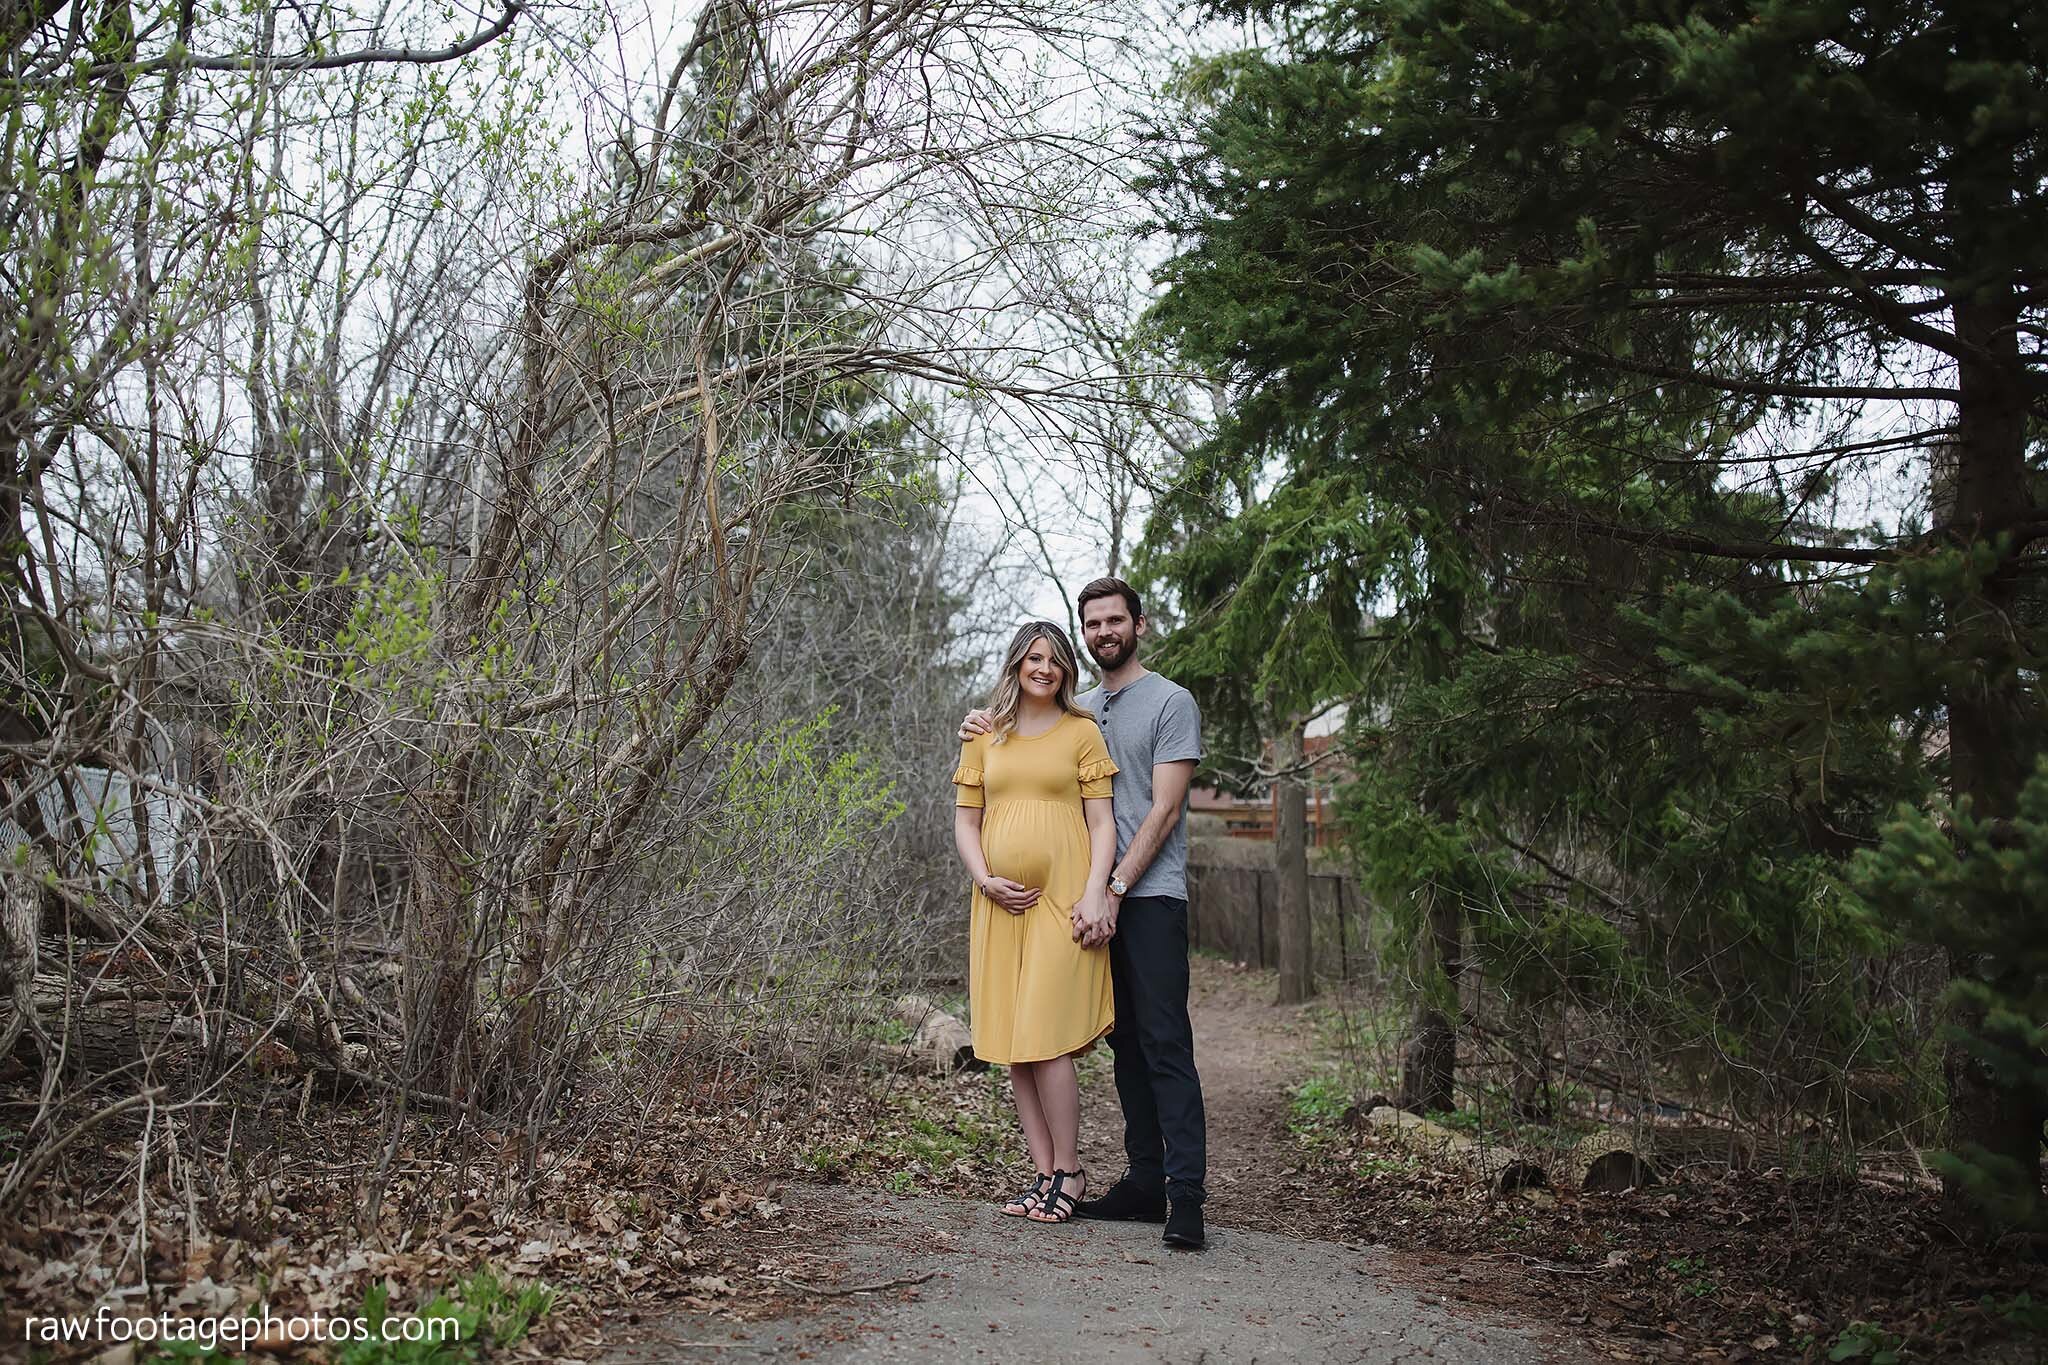 london_ontario_maternity_photographer-raw_footage_photography-in_home_lifestyle_maternity-forest_maternity_session-yellow_maternity_dress_016.jpg